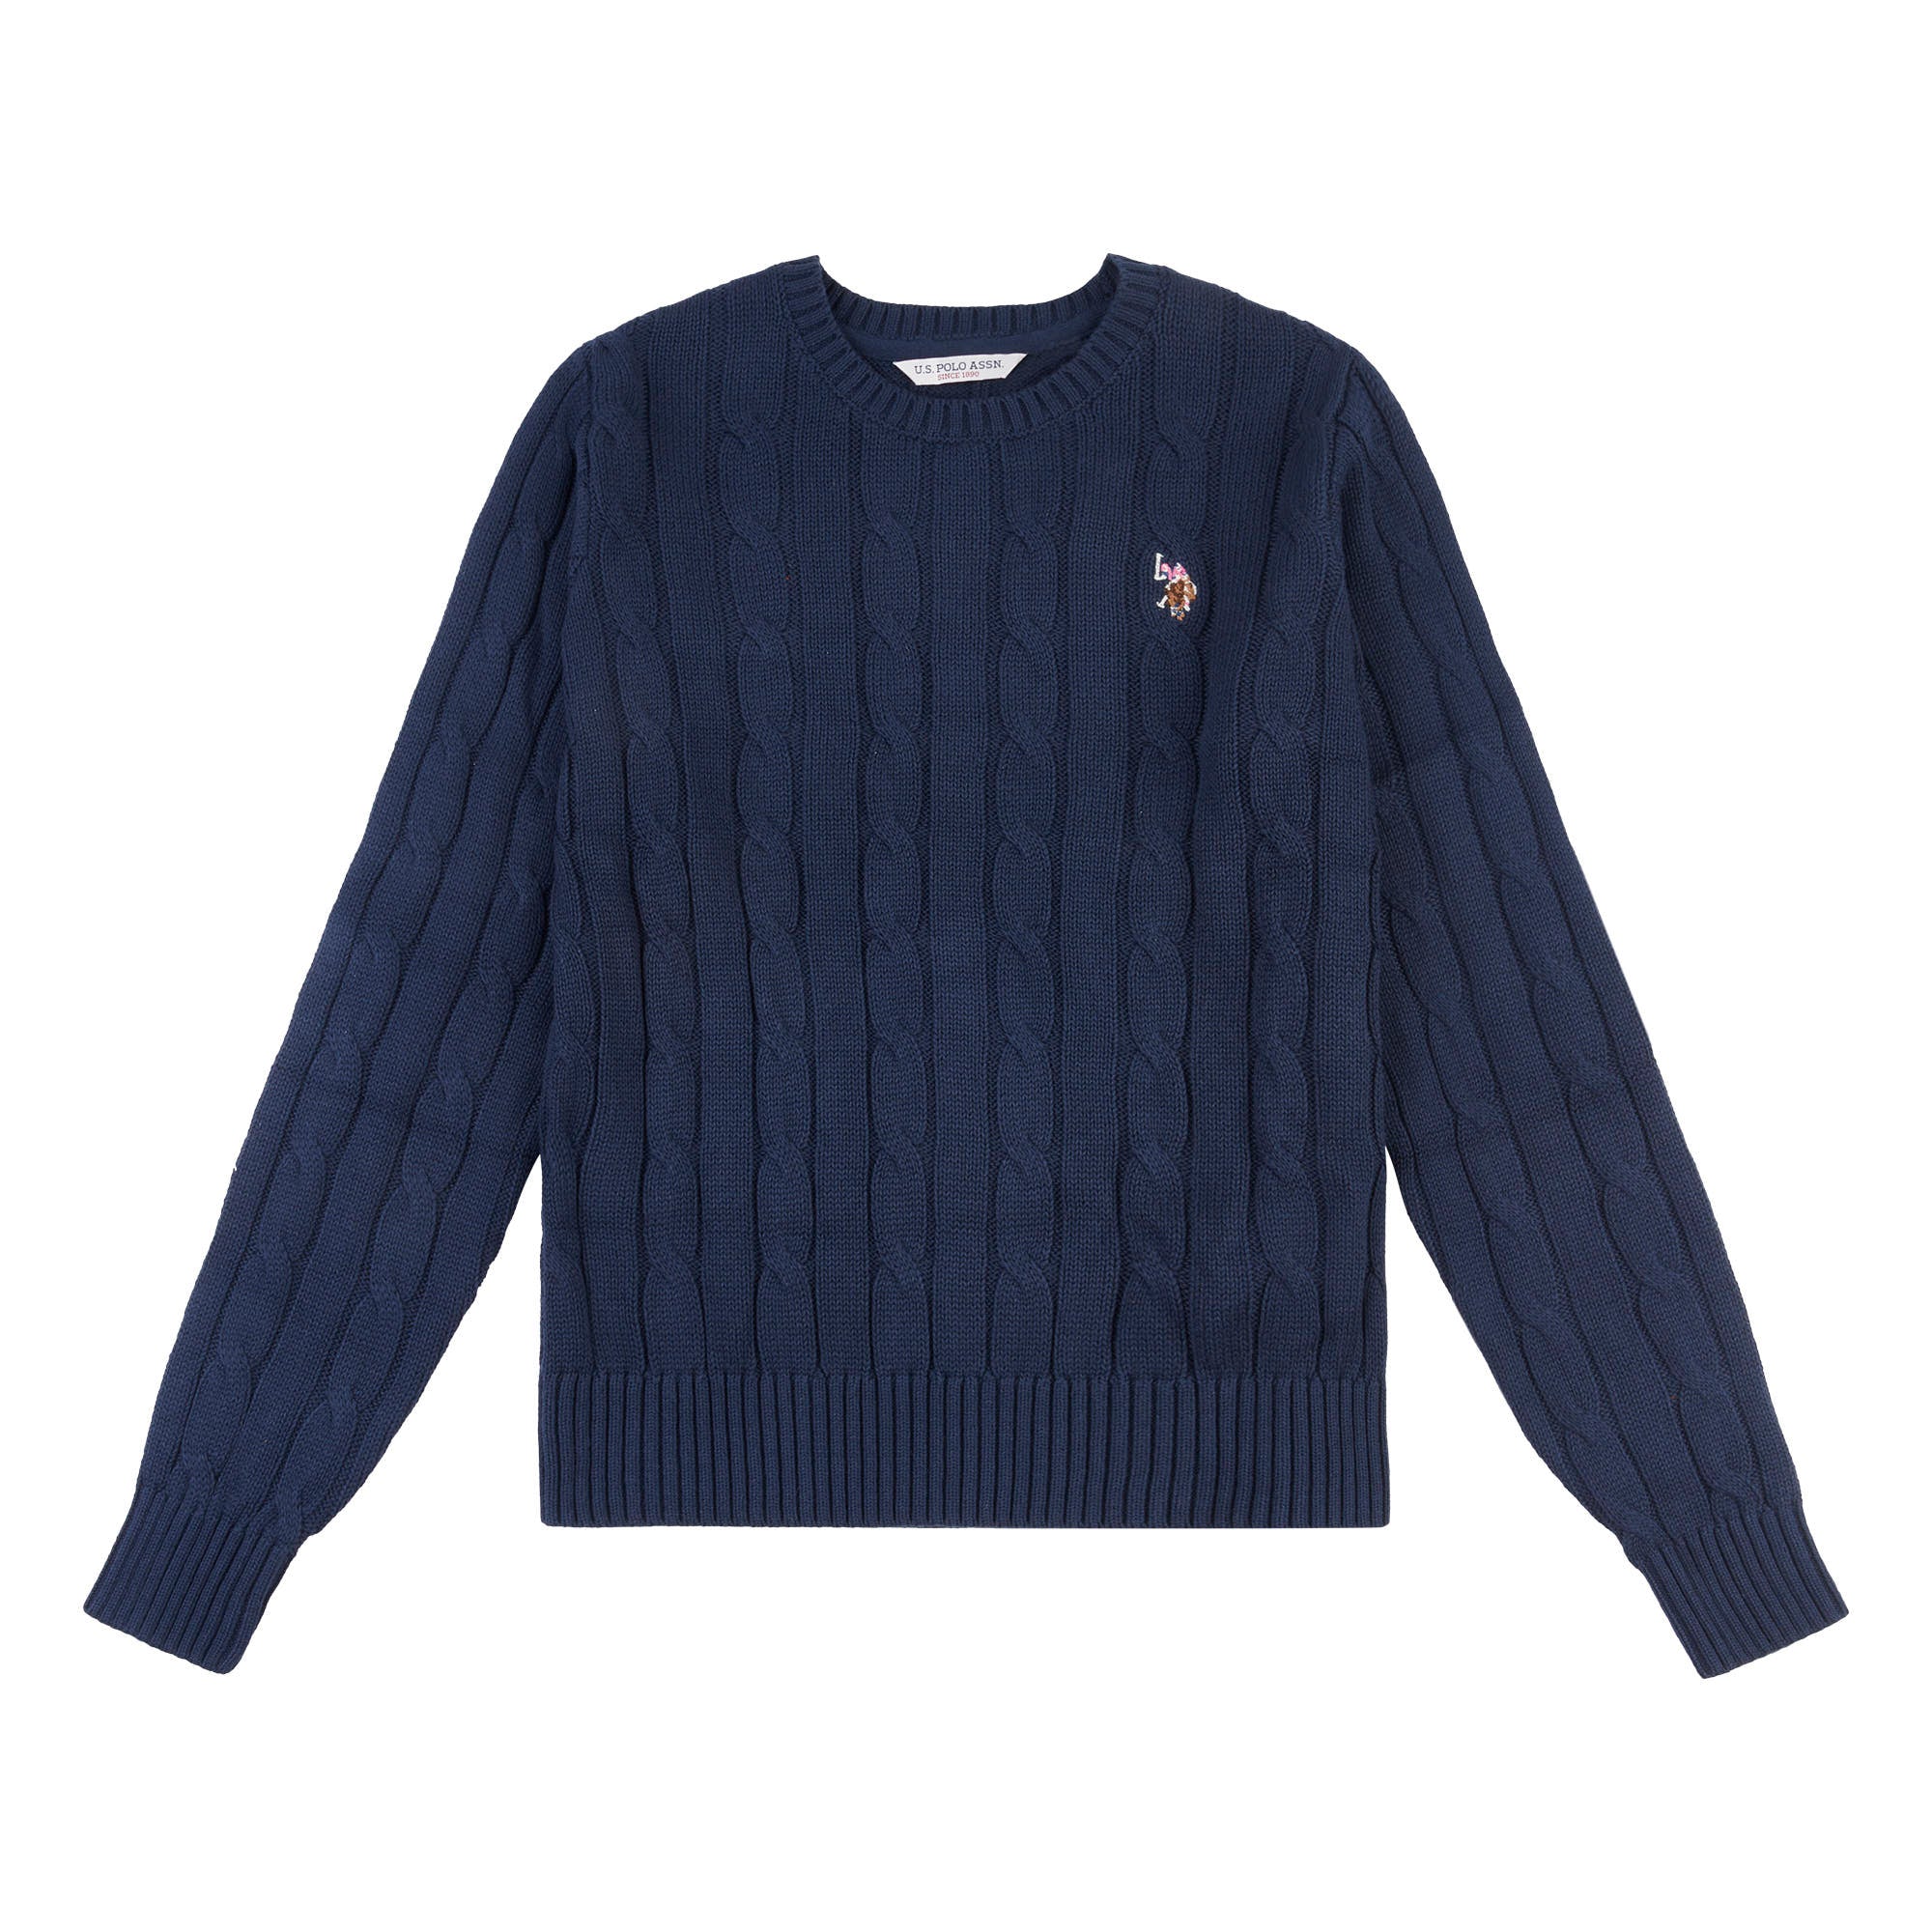 Womens Crew Neck Cable Knit Jumper in Navy Blue